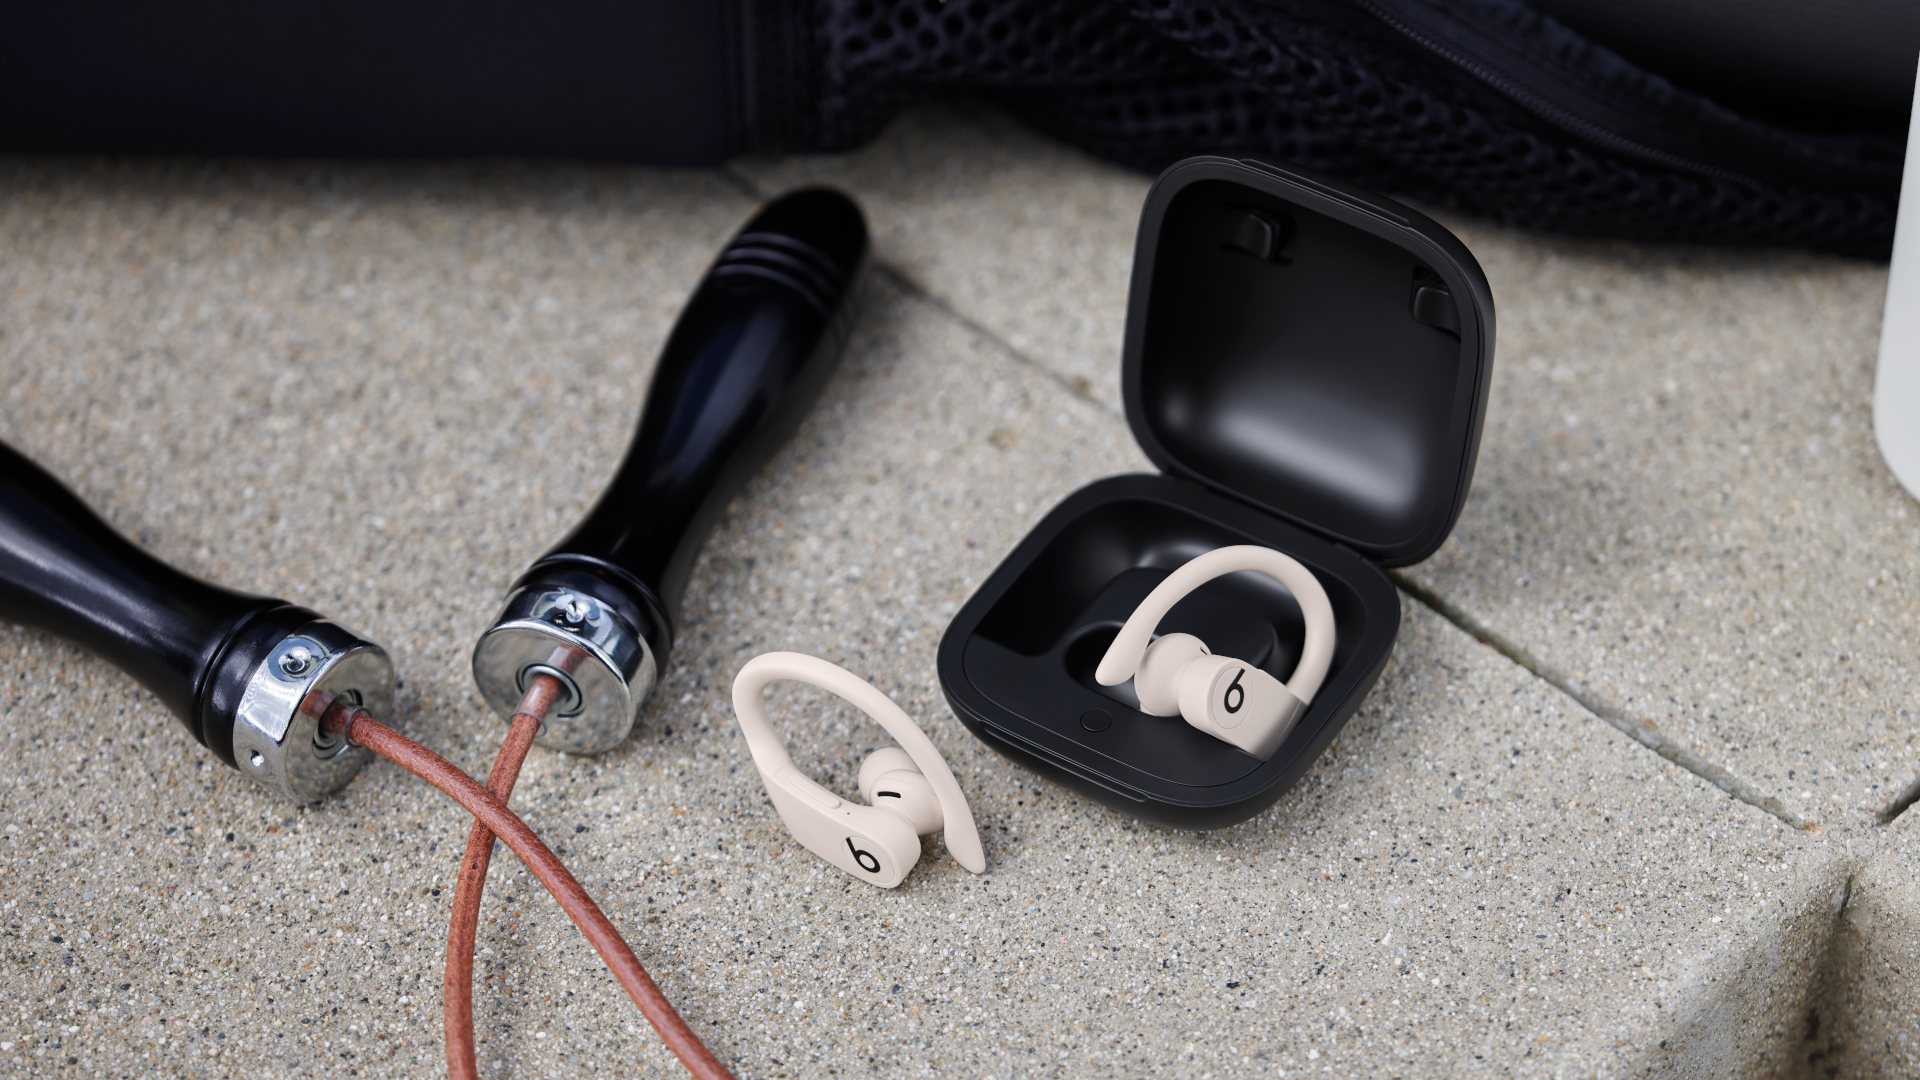 Apple S New Powerbeats Pro Are Airpods That Will Stay In When You